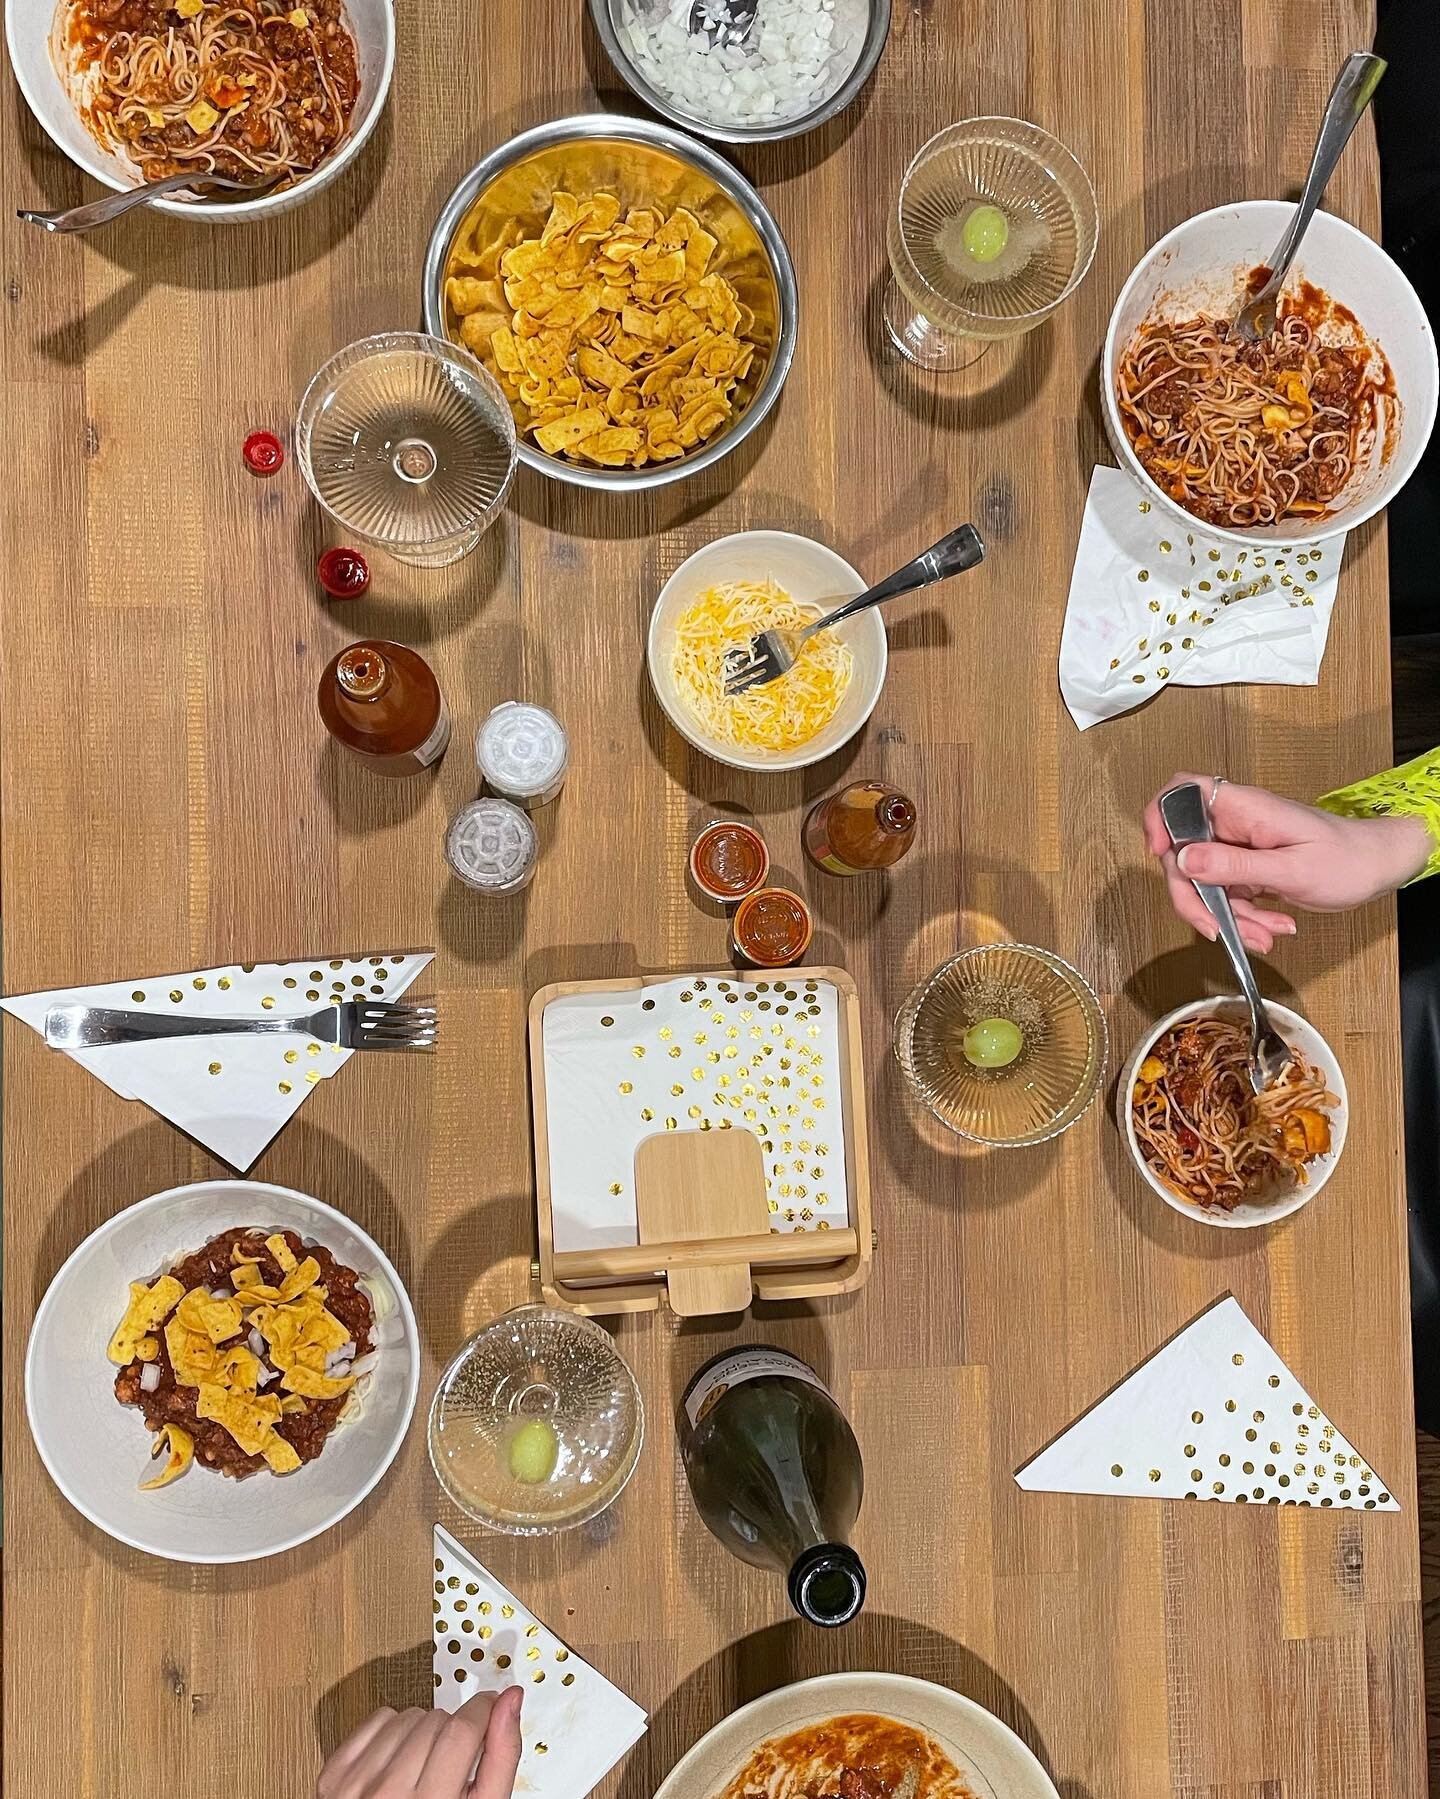 The annual chili tradition lives on and was shared with dear friends on New Year&rsquo;s Eve.